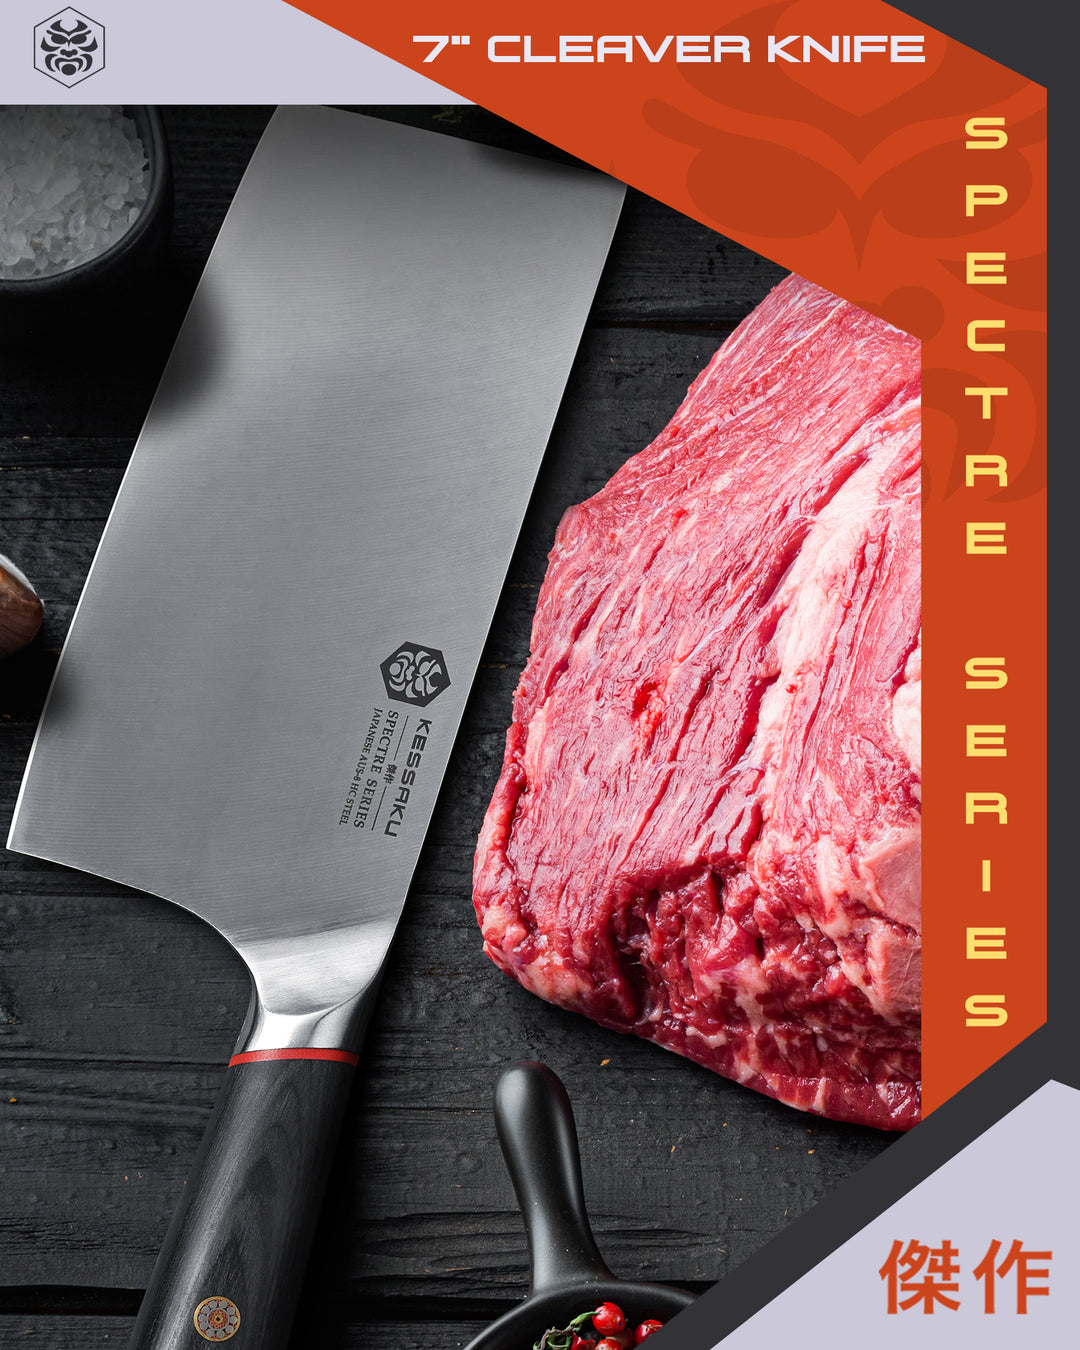 The Spectre Cleaver Knife after prepping a large cut of beef